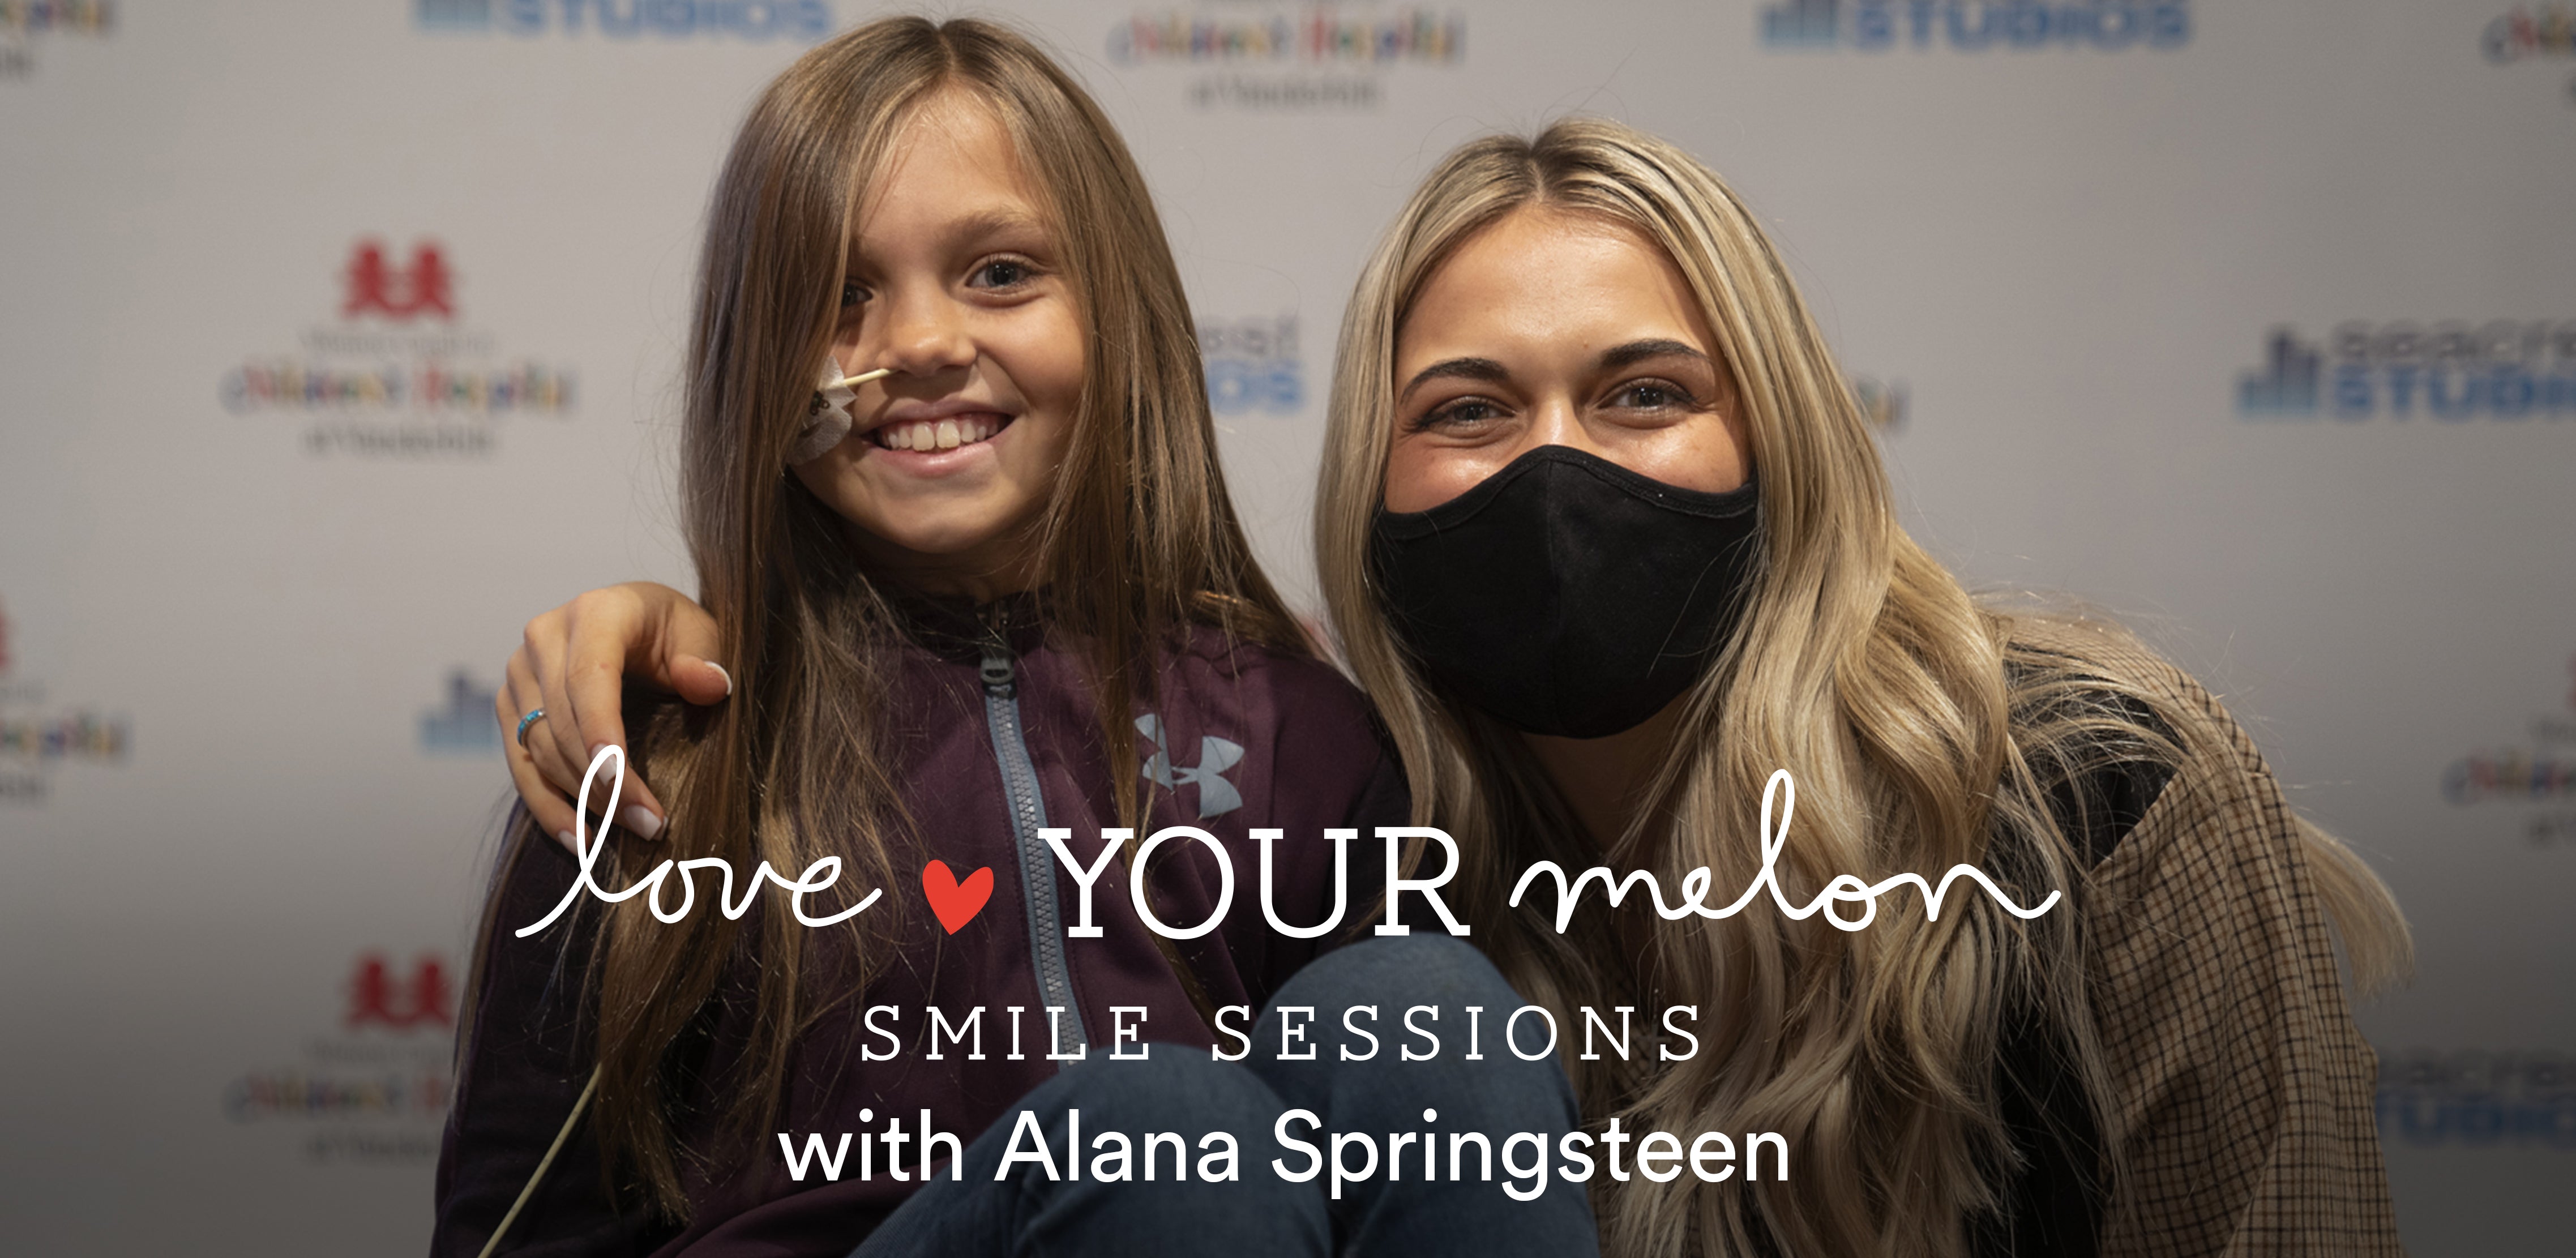 Pediatric Cancer Awareness Month: Smile Sessions with Alana Springsteen